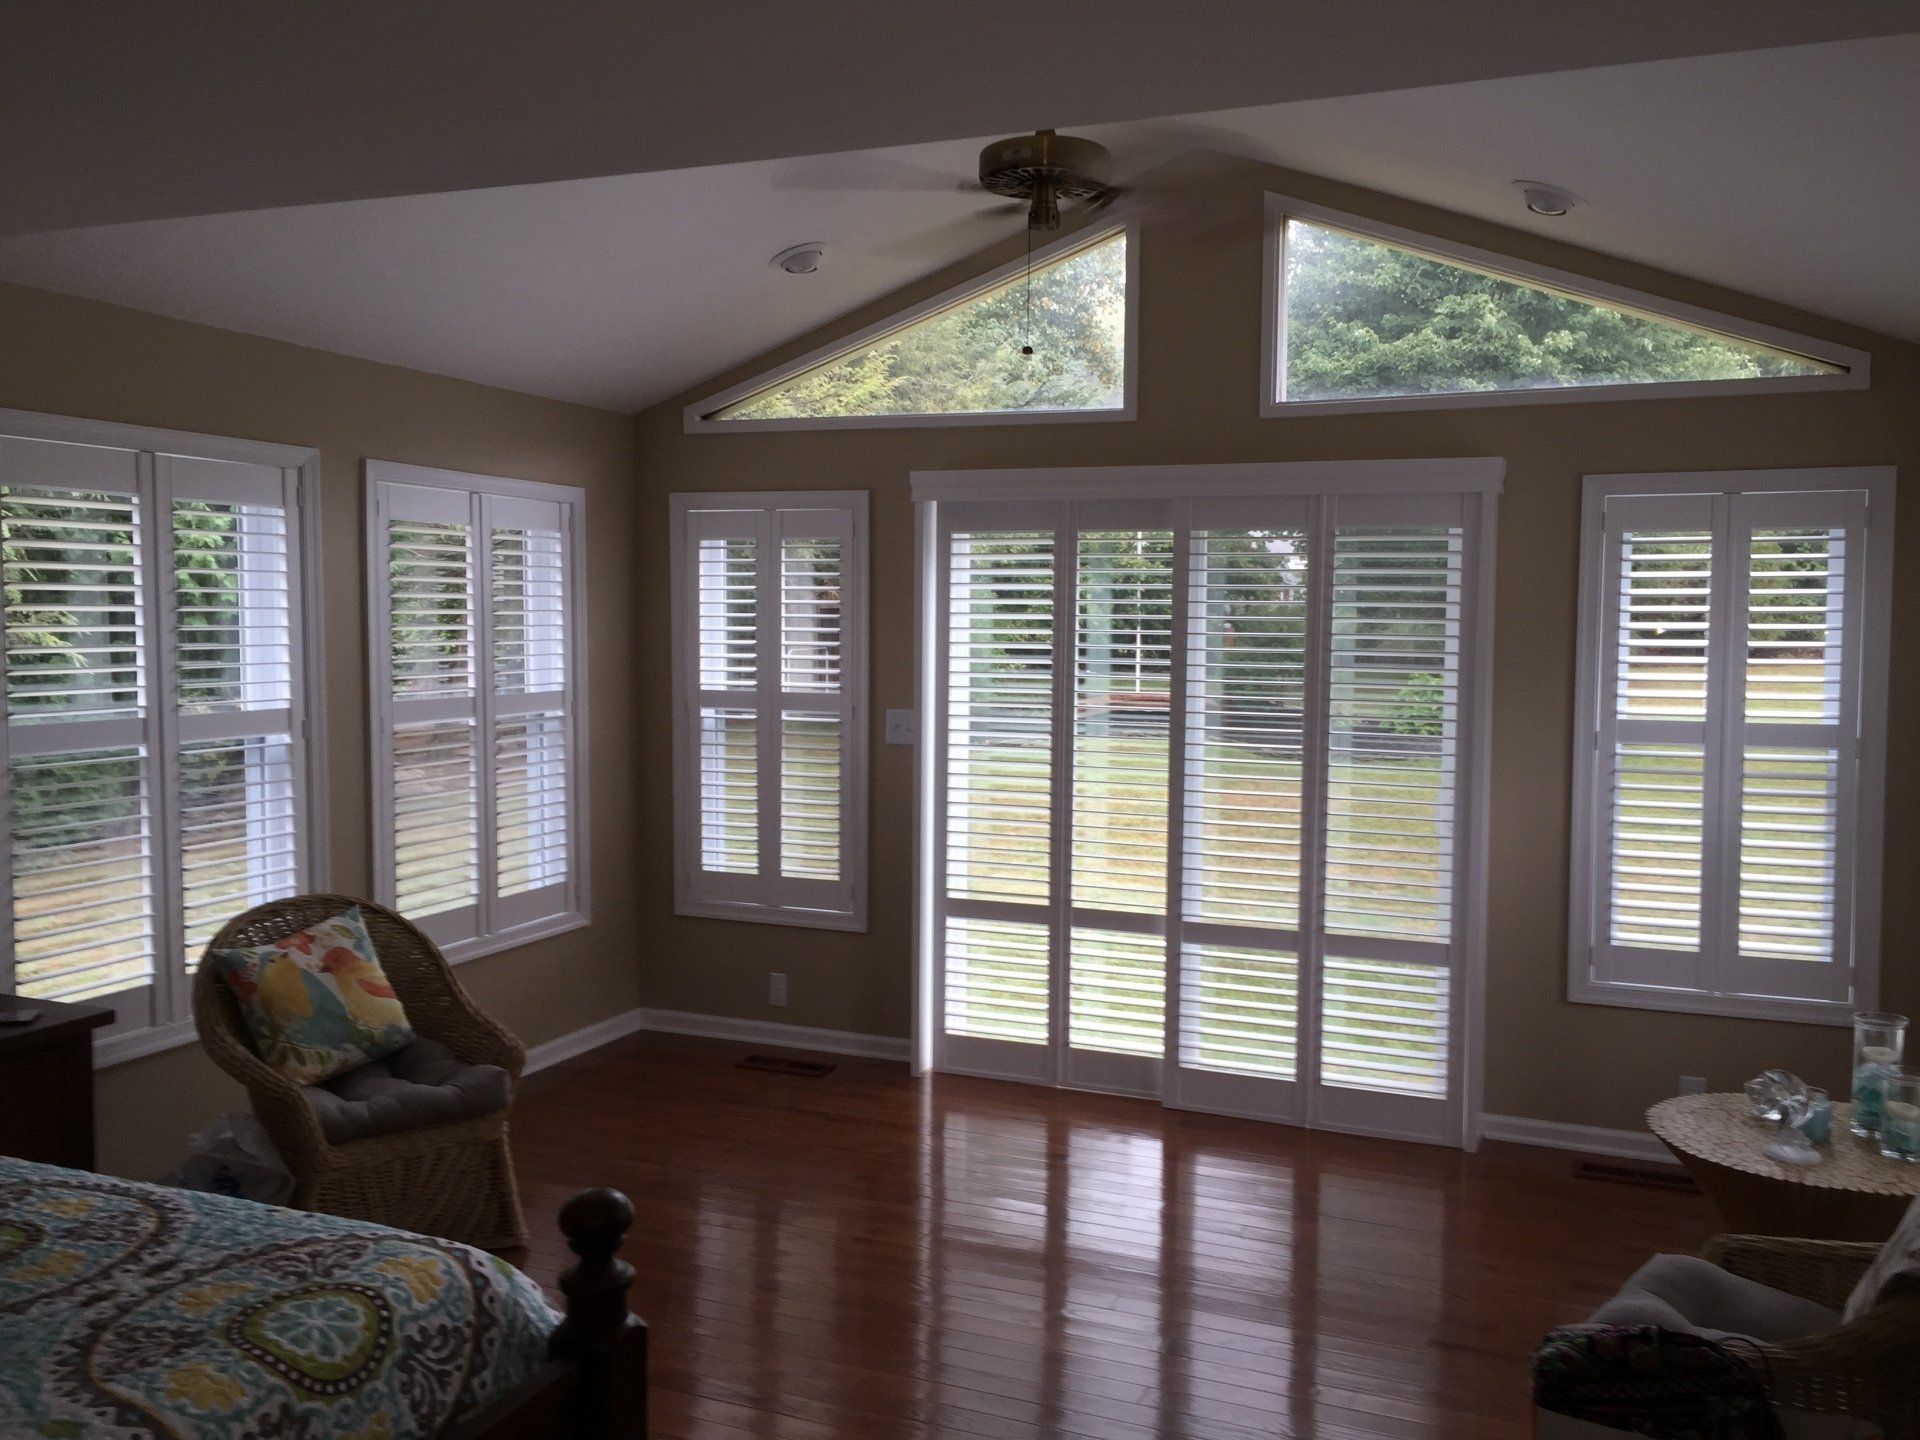 Shutters in living space